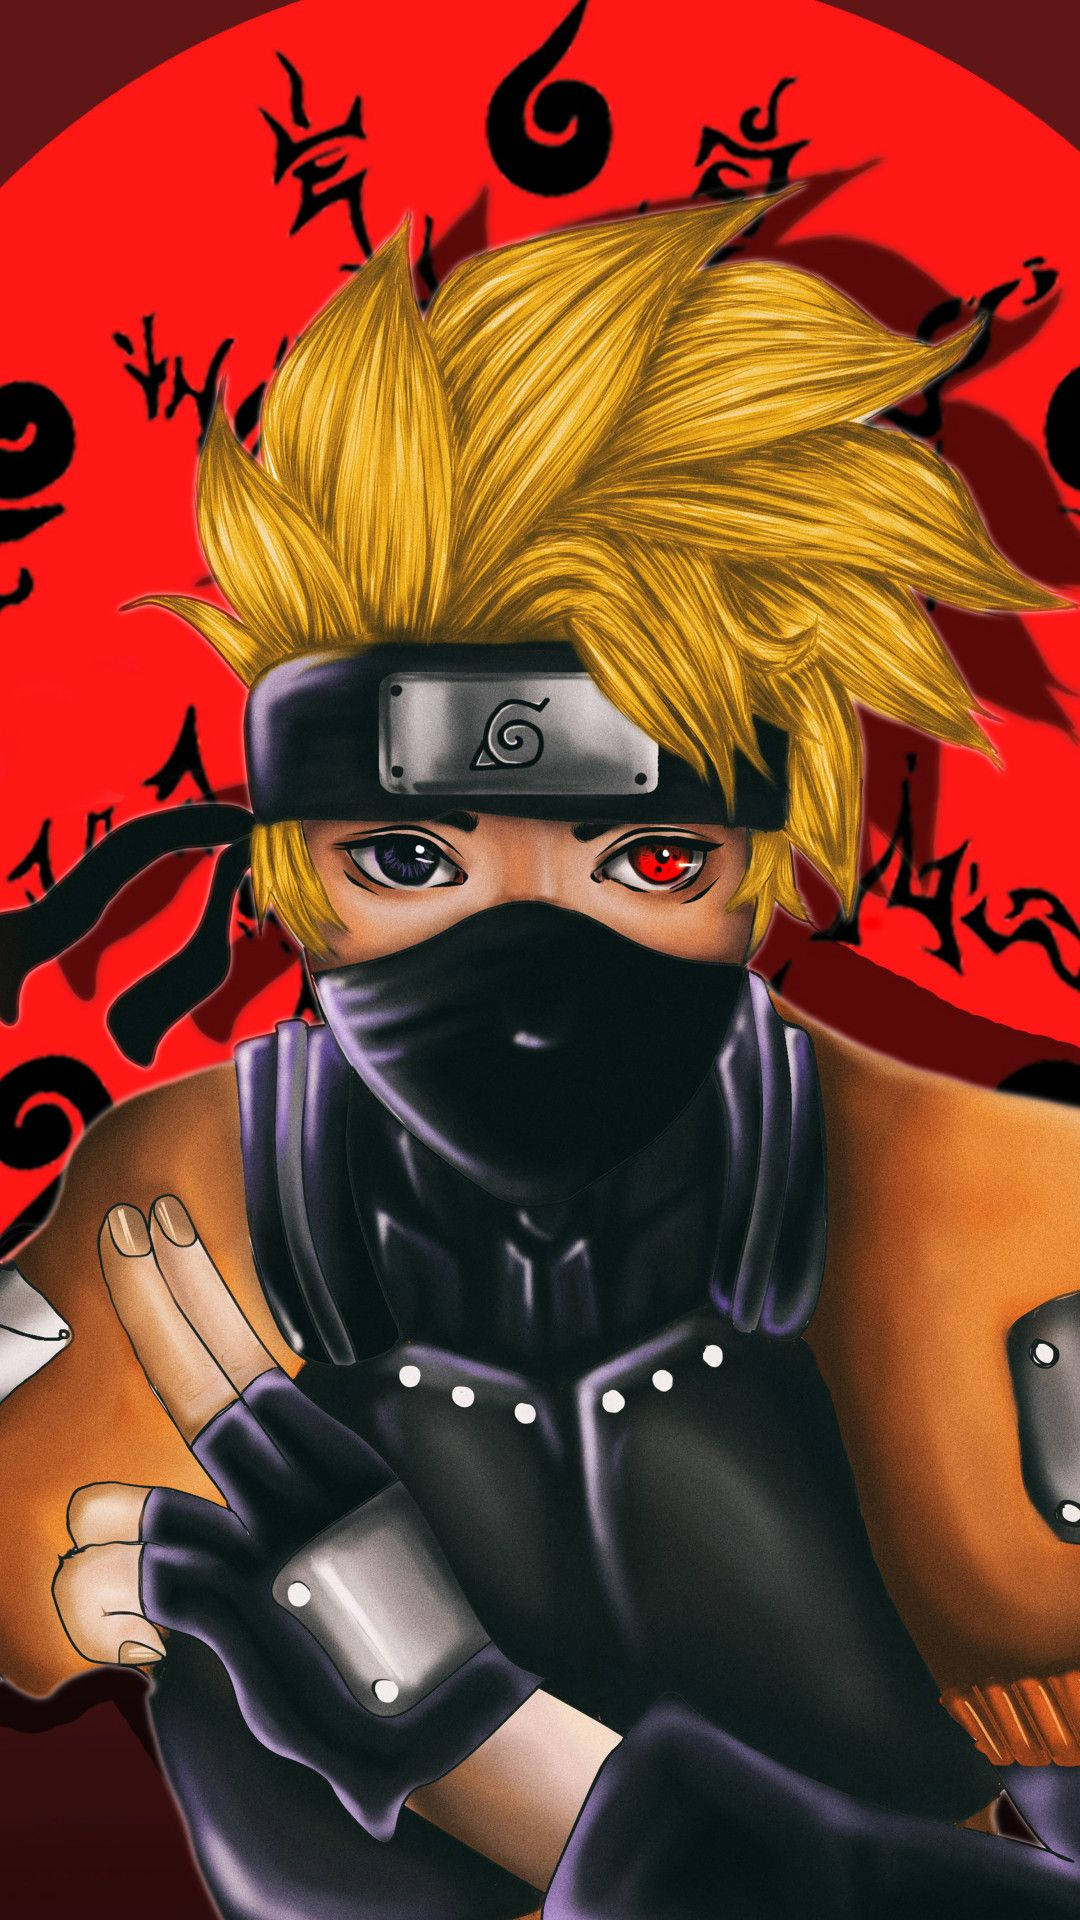 Style up like Naruto in Gucci Wallpaper